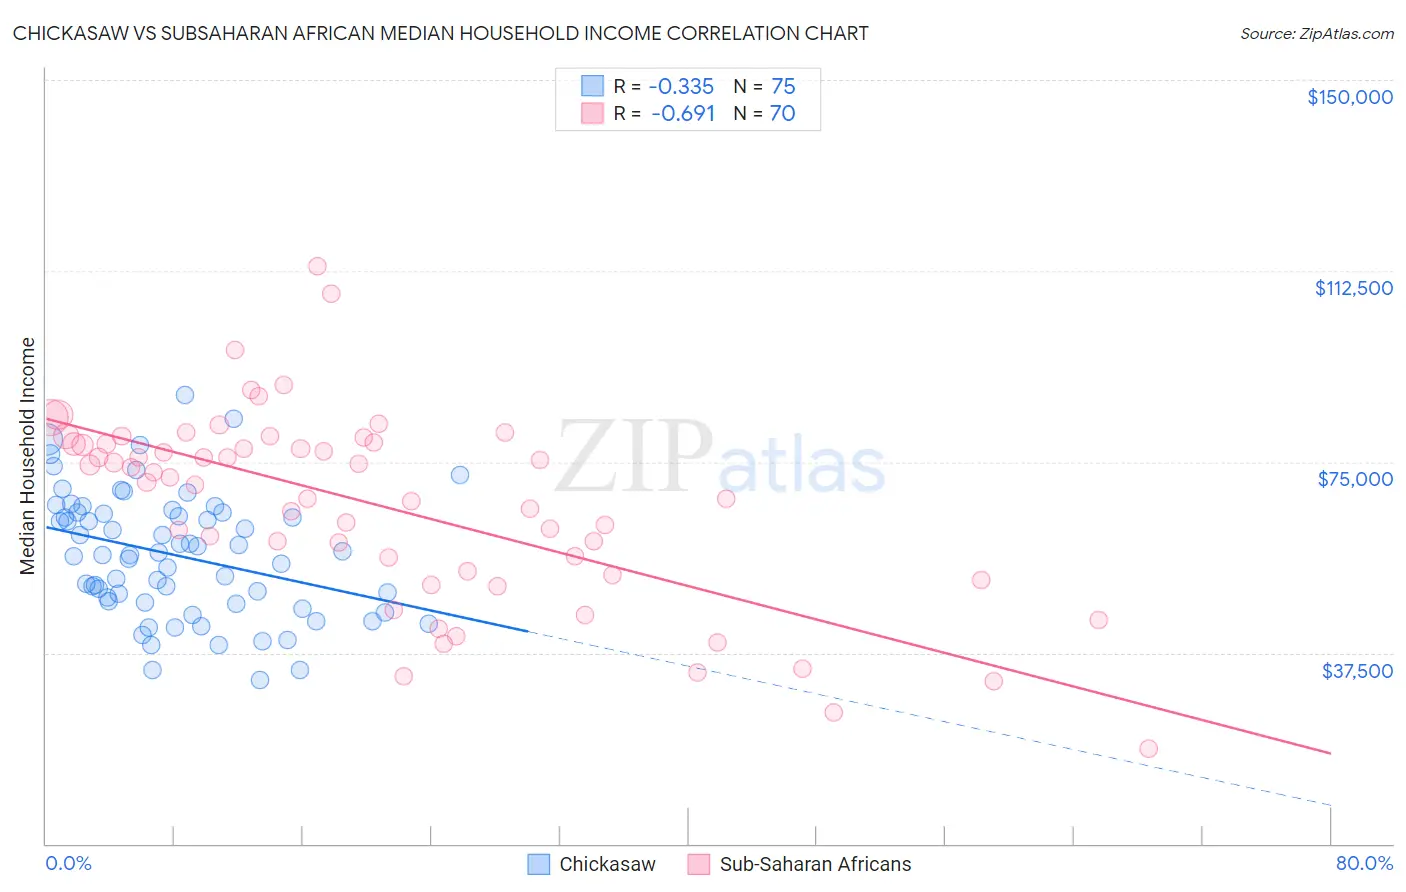 Chickasaw vs Subsaharan African Median Household Income